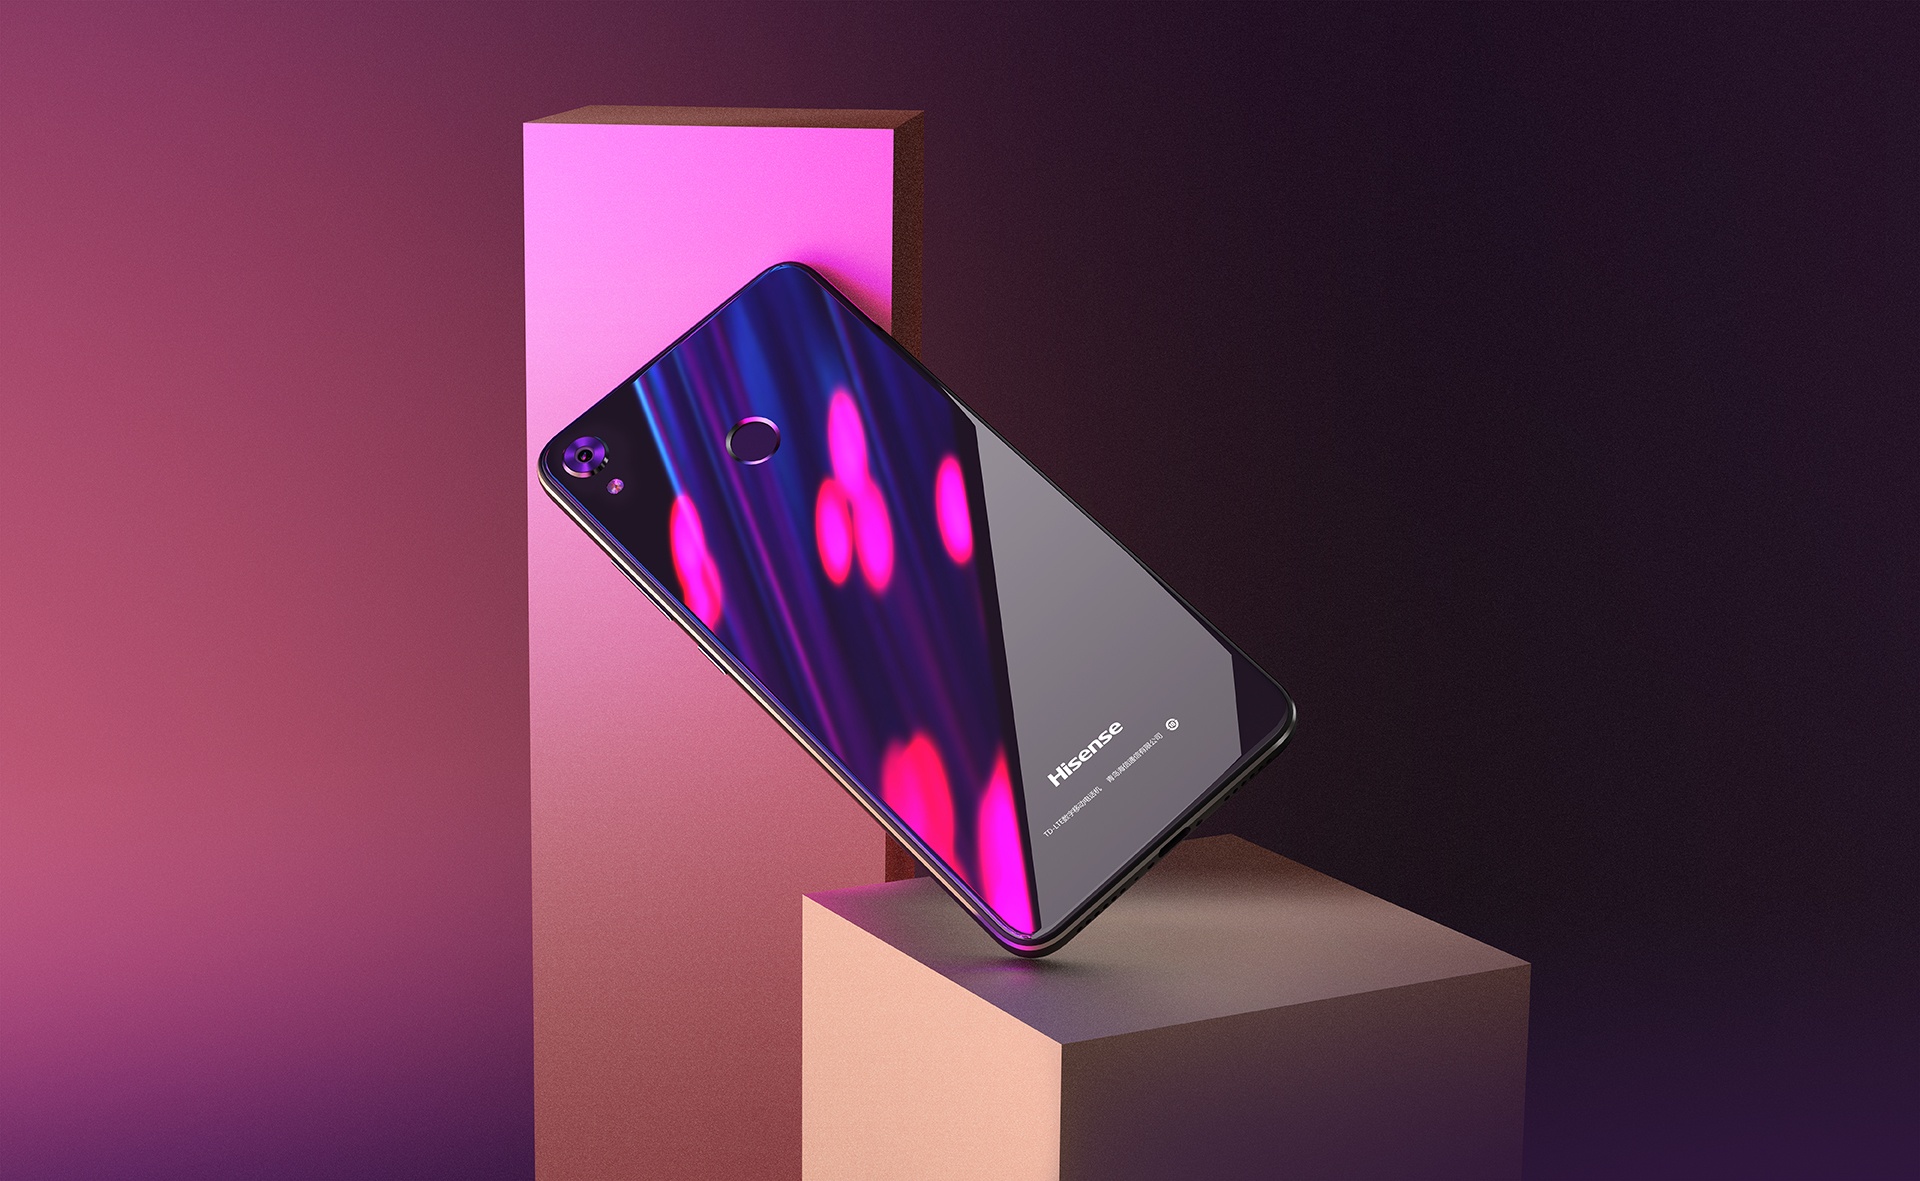 Infinity Screen Hisense InfinityH11 01 #CES2018 – HISENSE : Nouvelle gamme de smartphone Infinity Screen H11 et F17 Android